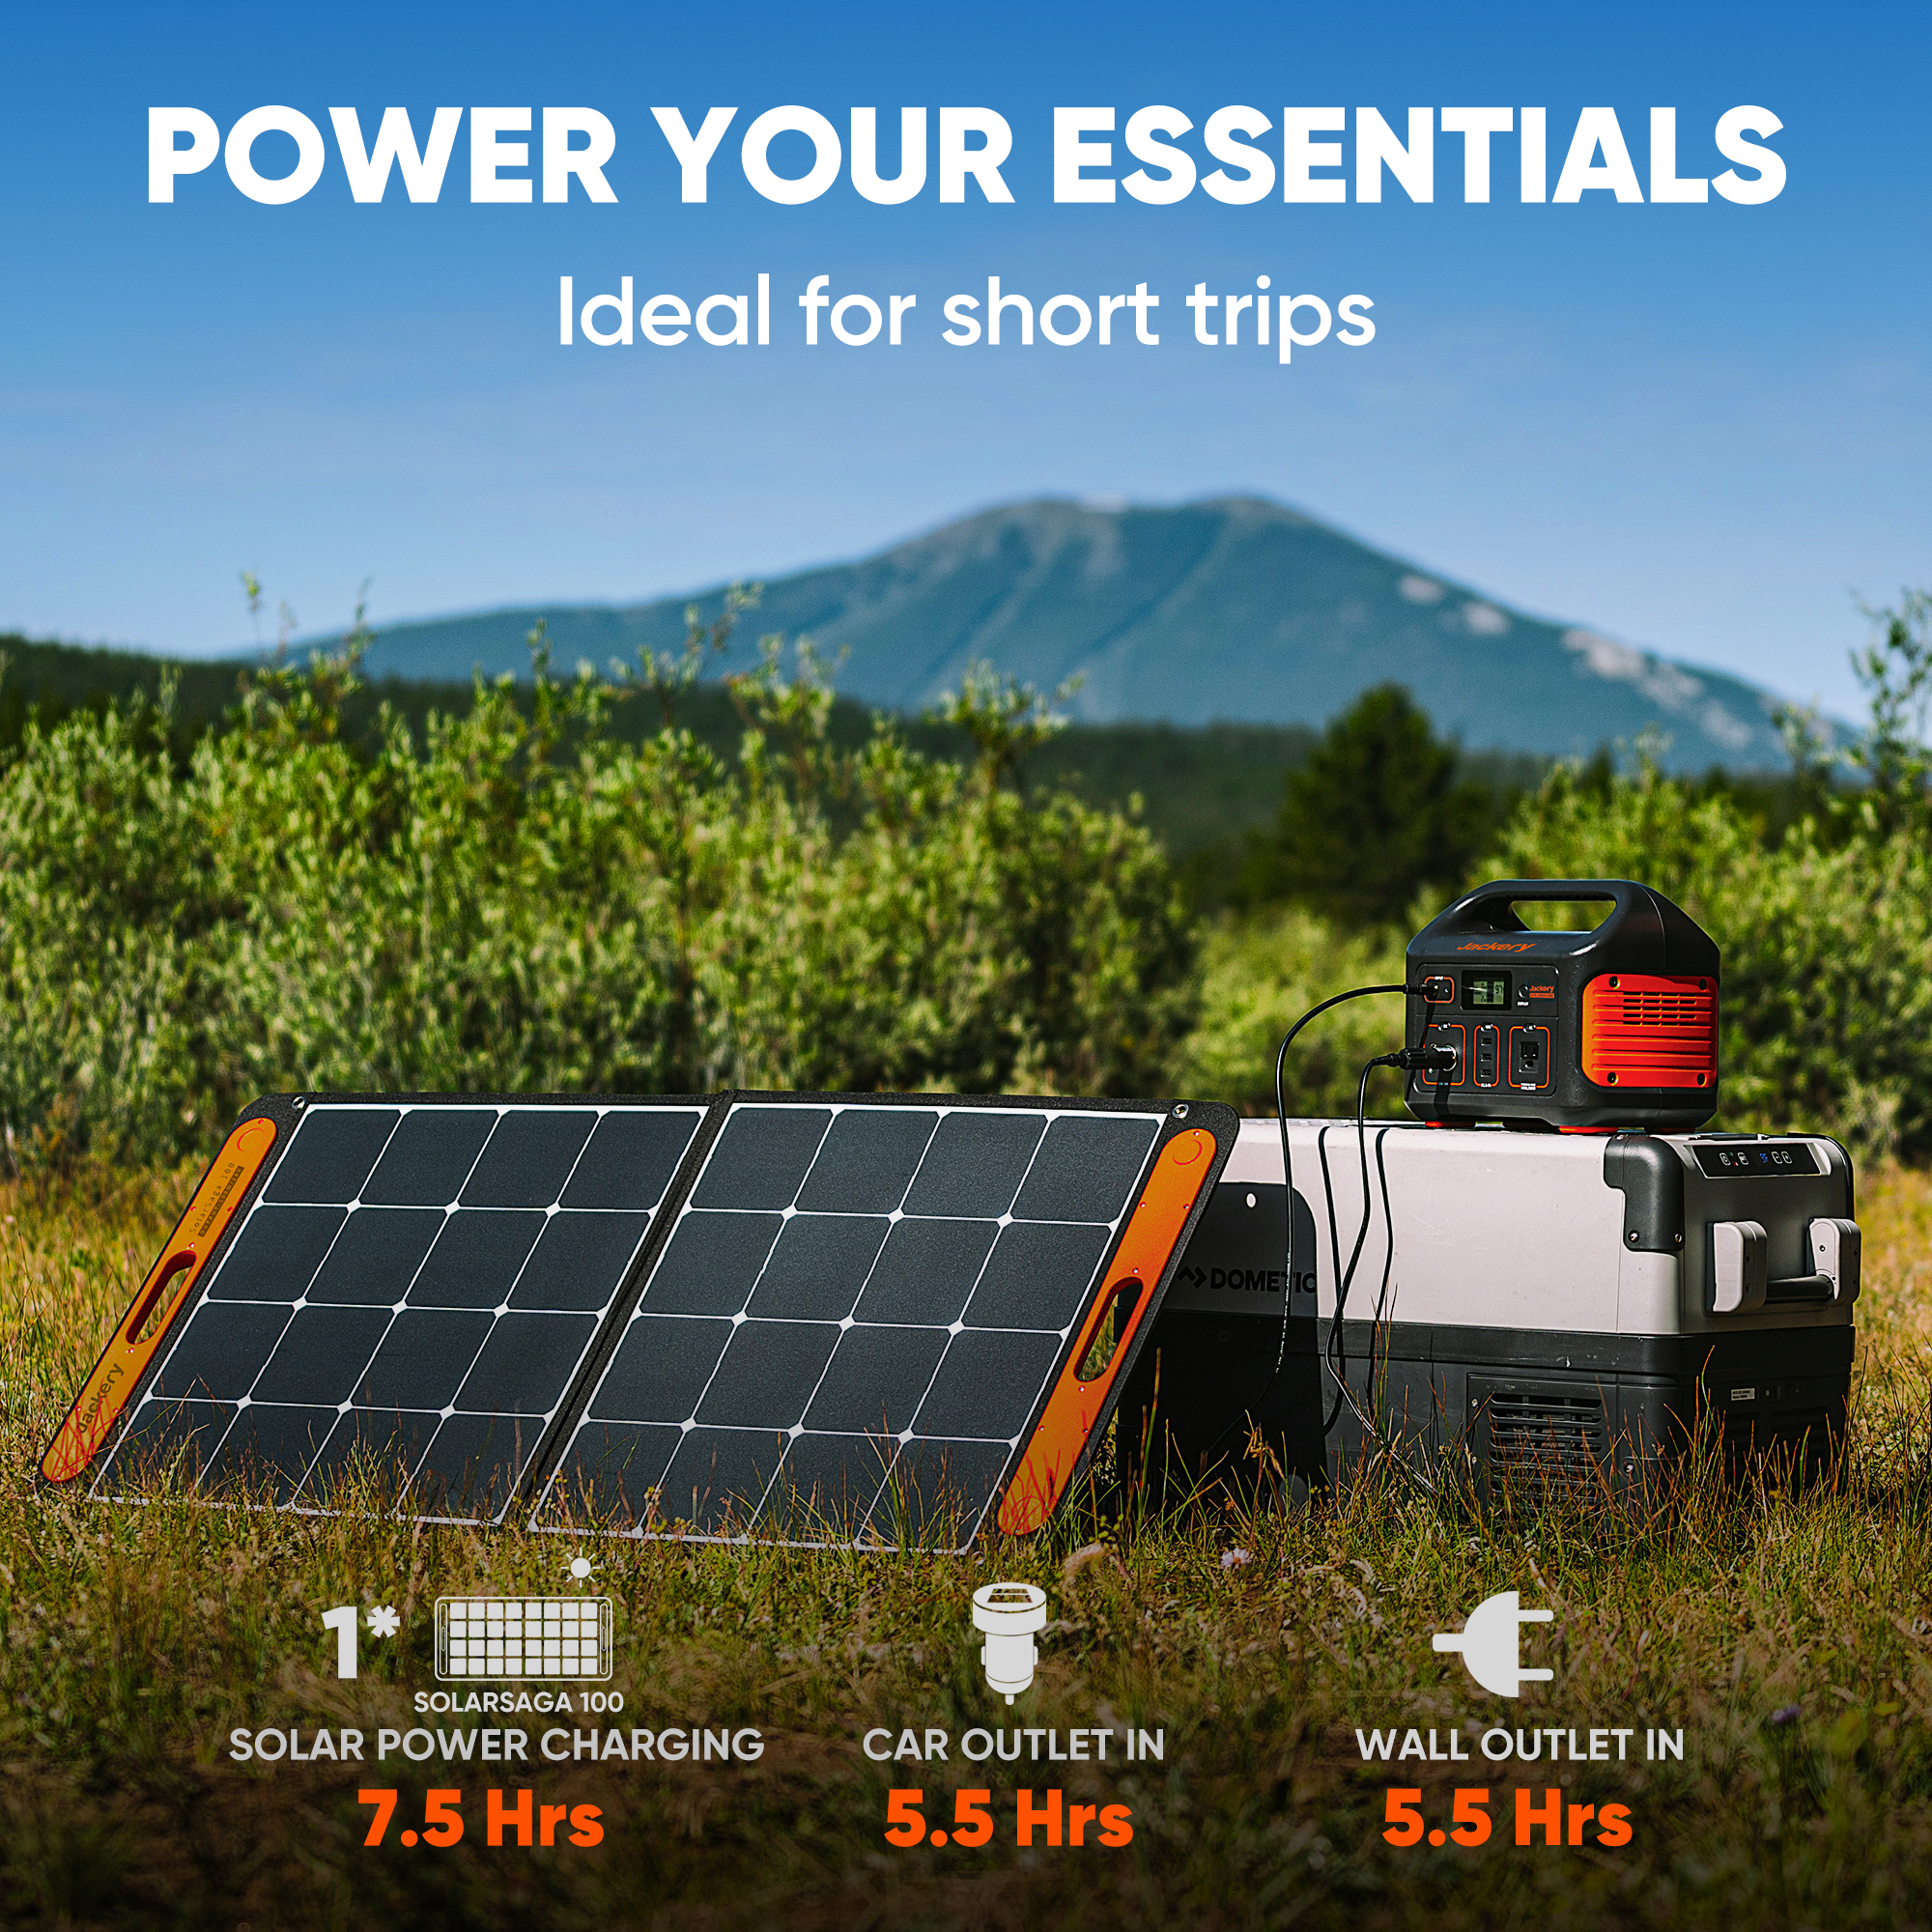 Jackery Solar Generator 500, 518Wh Outdoor Solar Generator Mobile Lithium Battery Pack with Solar Saga 100 for Road Trip Camping, Outdoor Adventure - image 4 of 6